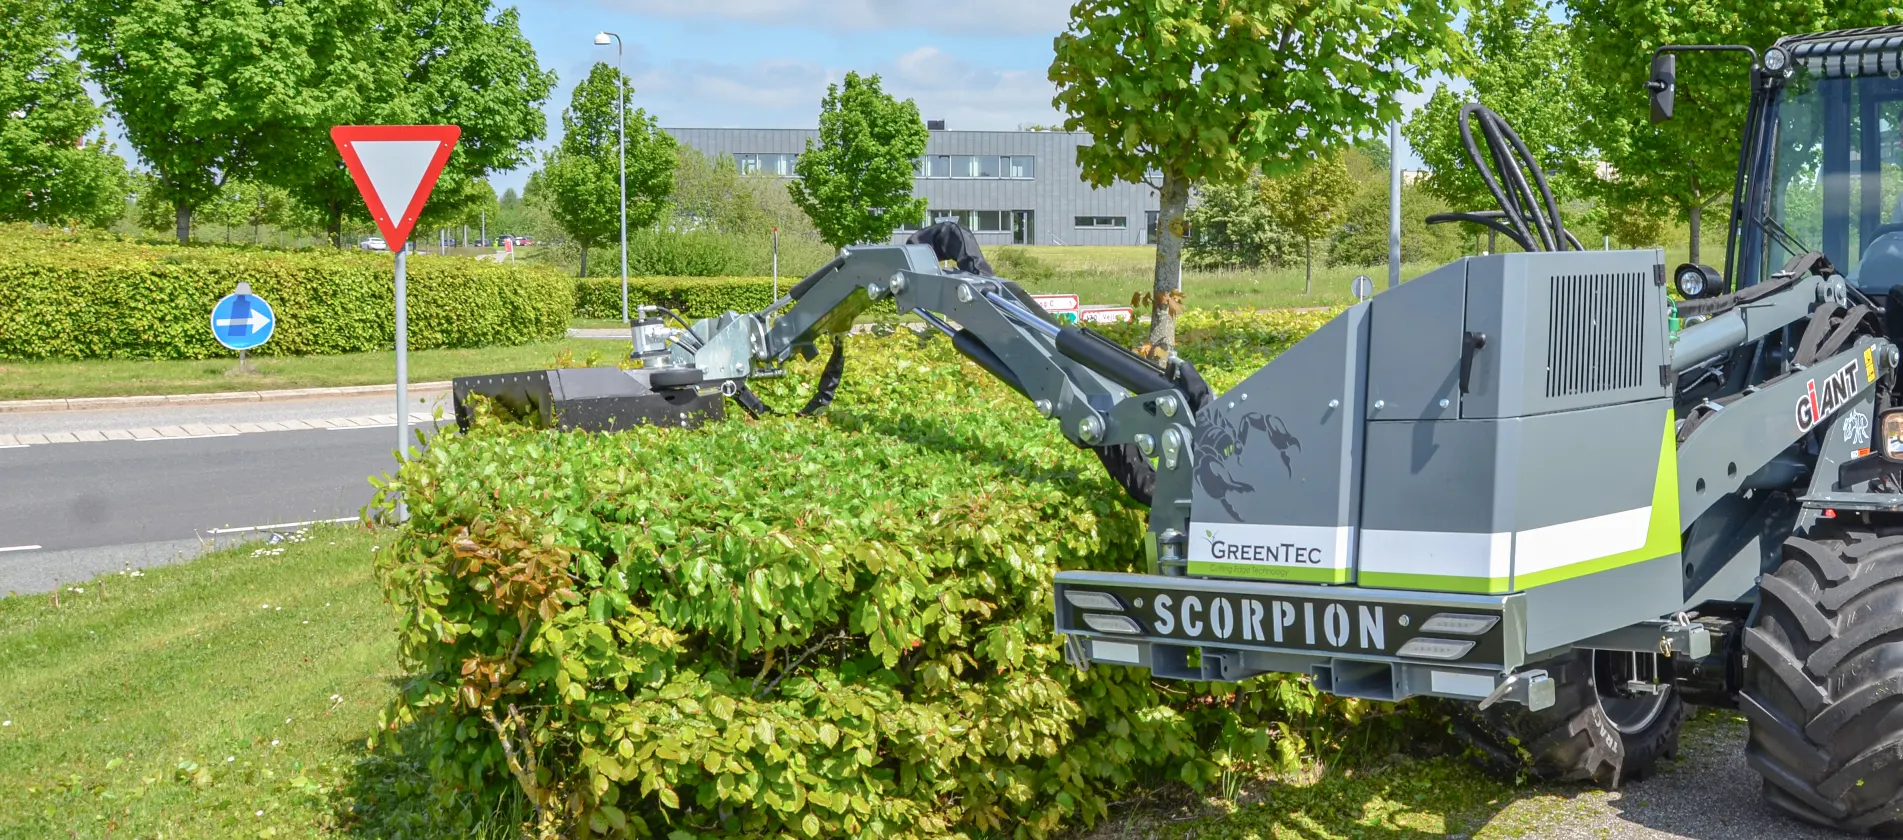 Hydraulic hedge trimmer mounted on a Giant skid steer loader